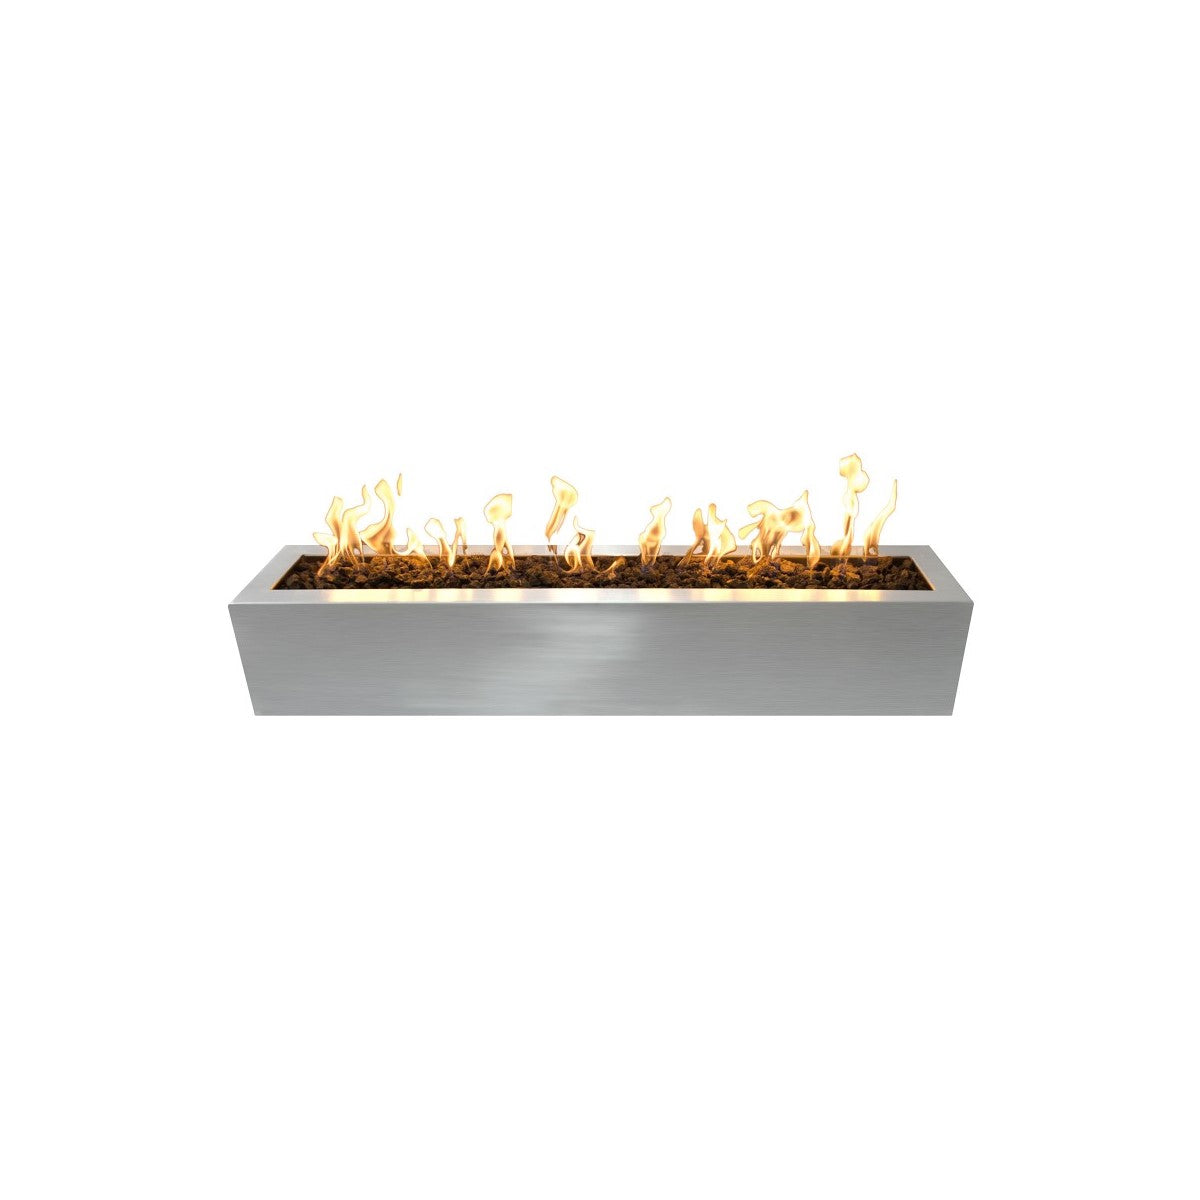 60" Eaves Fire Pit Stainless Steel